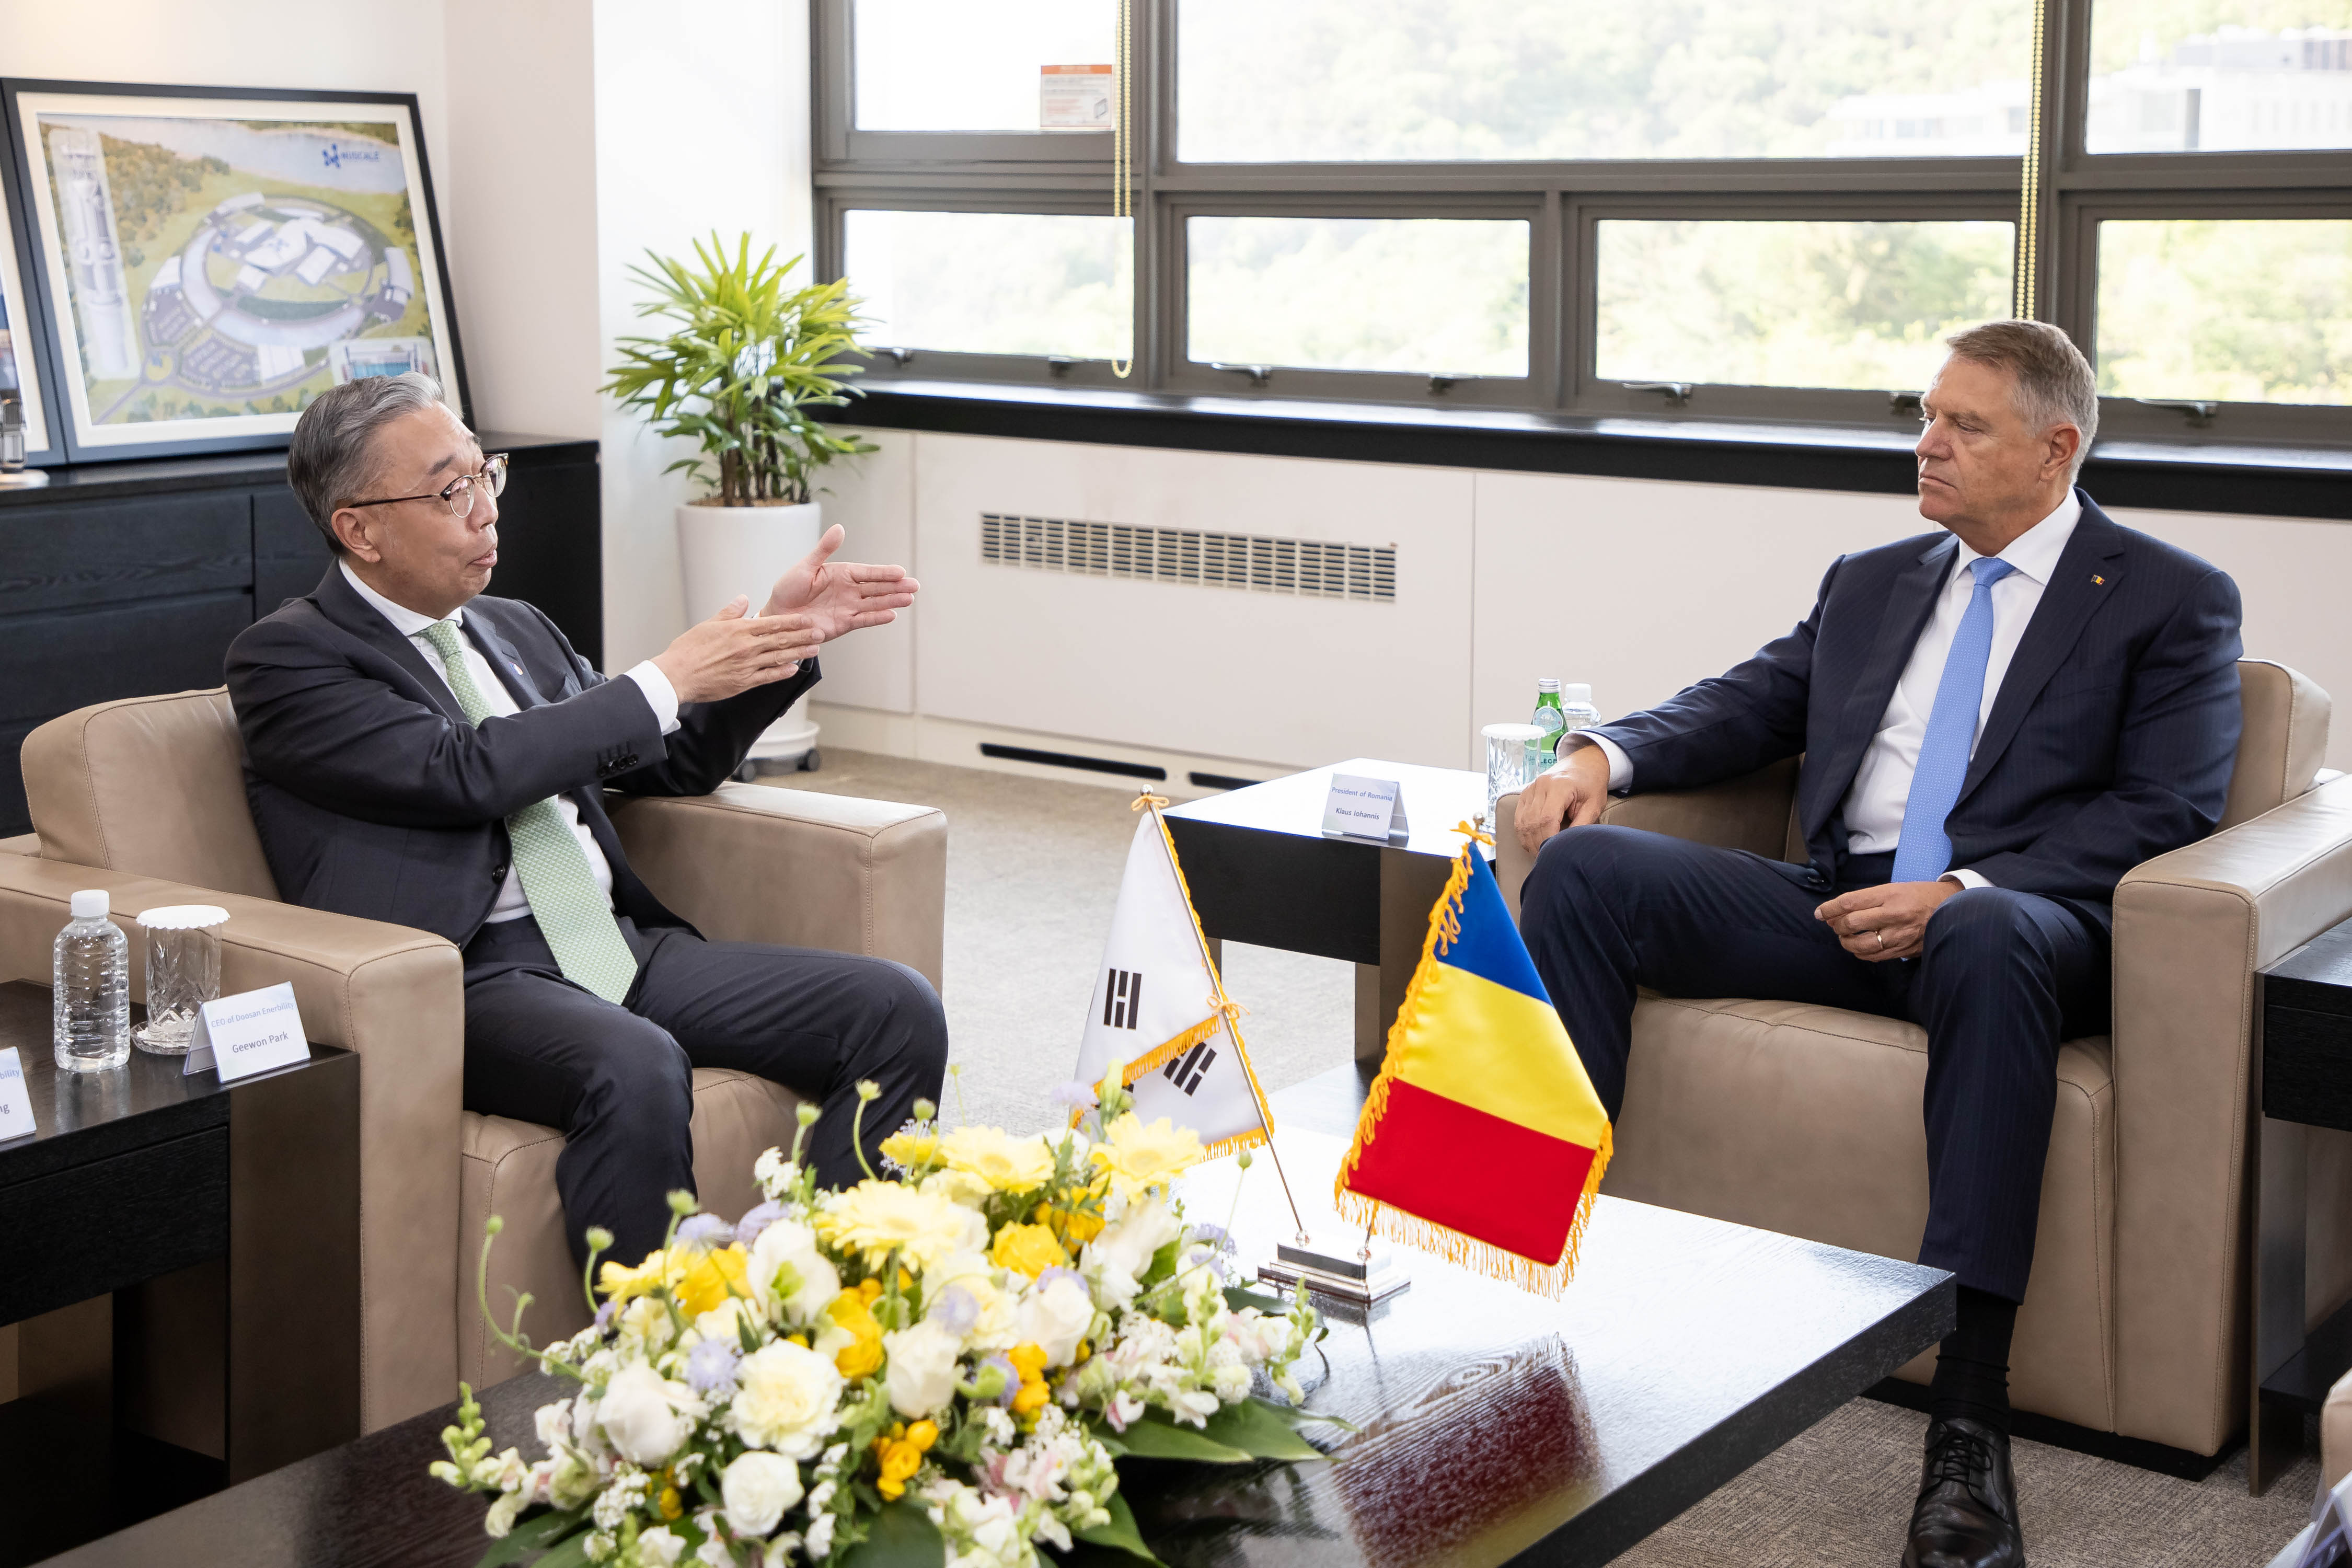 Romanian President Klaus Iohannis (on the right) talking with Doosan Enerbility Chairman Geewon Park while touring the company’s Changwon headquarters on April 24.